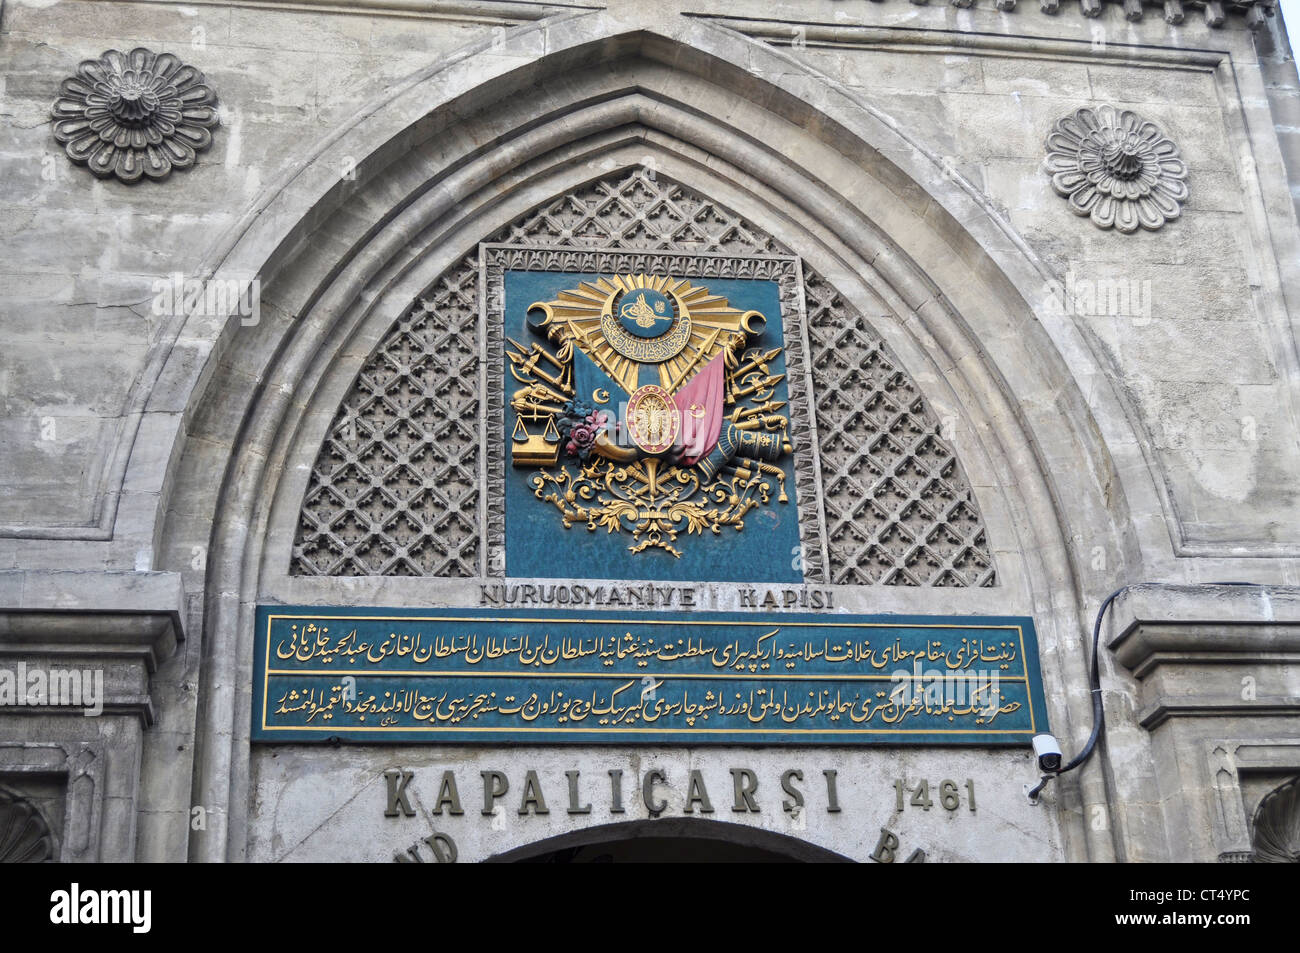 Entrance of Kapalicarsi - Covered Market - The Grand Bazaar in Istanbul, Turkey Stock Photo